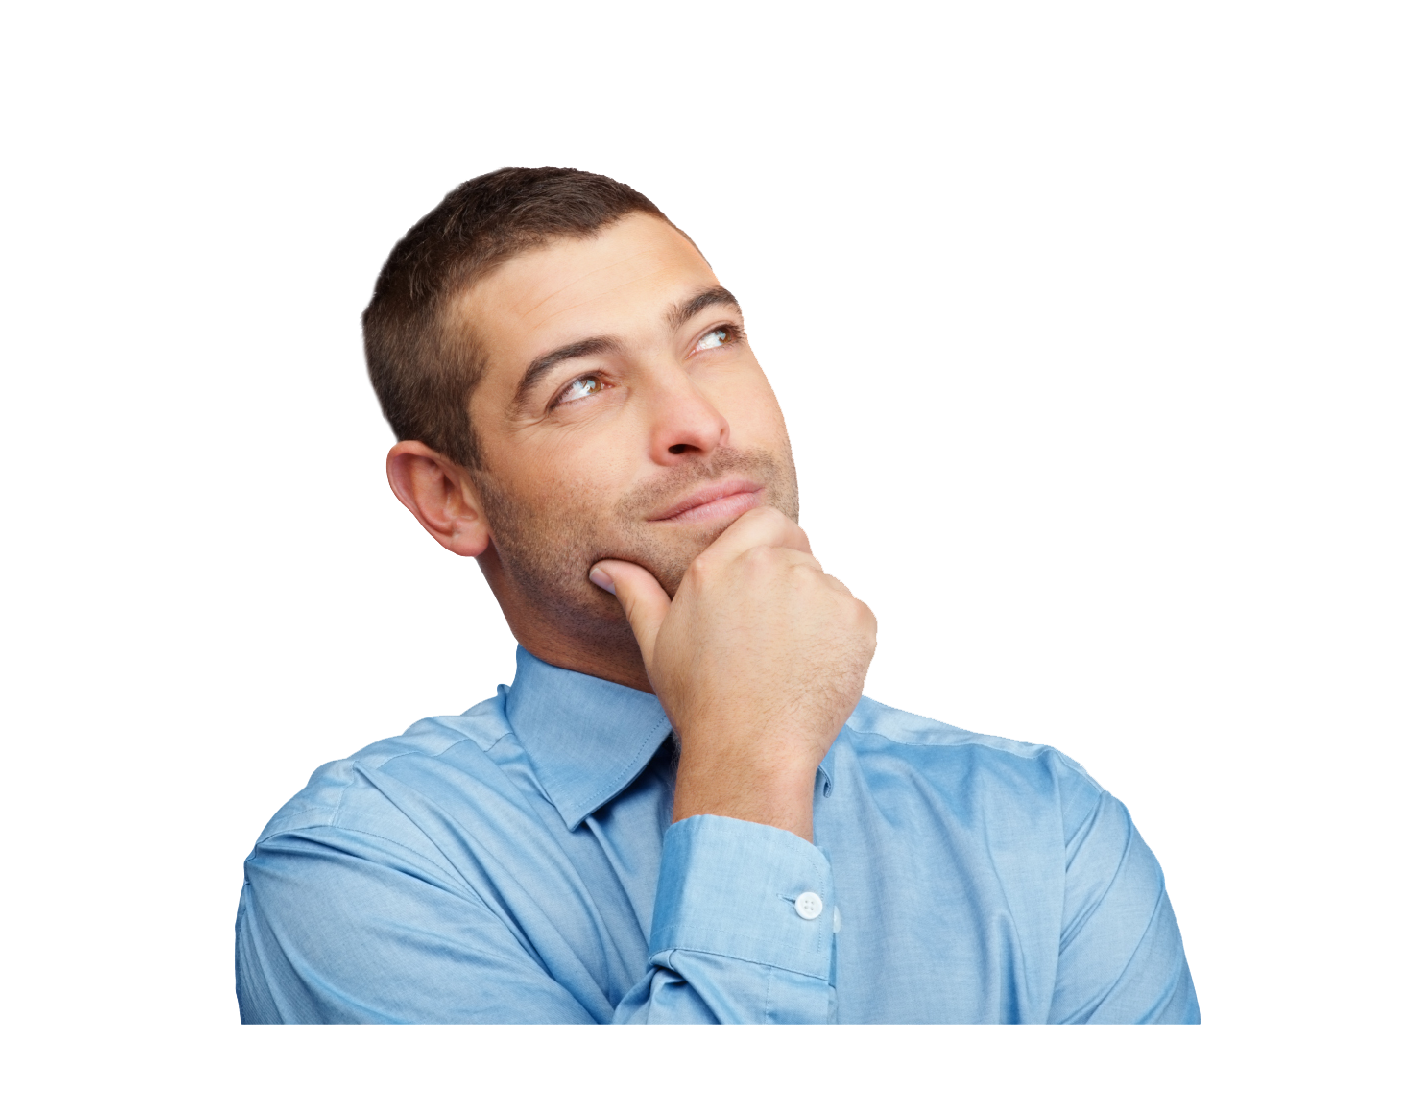 Thinking Man PNG Image in High Definition